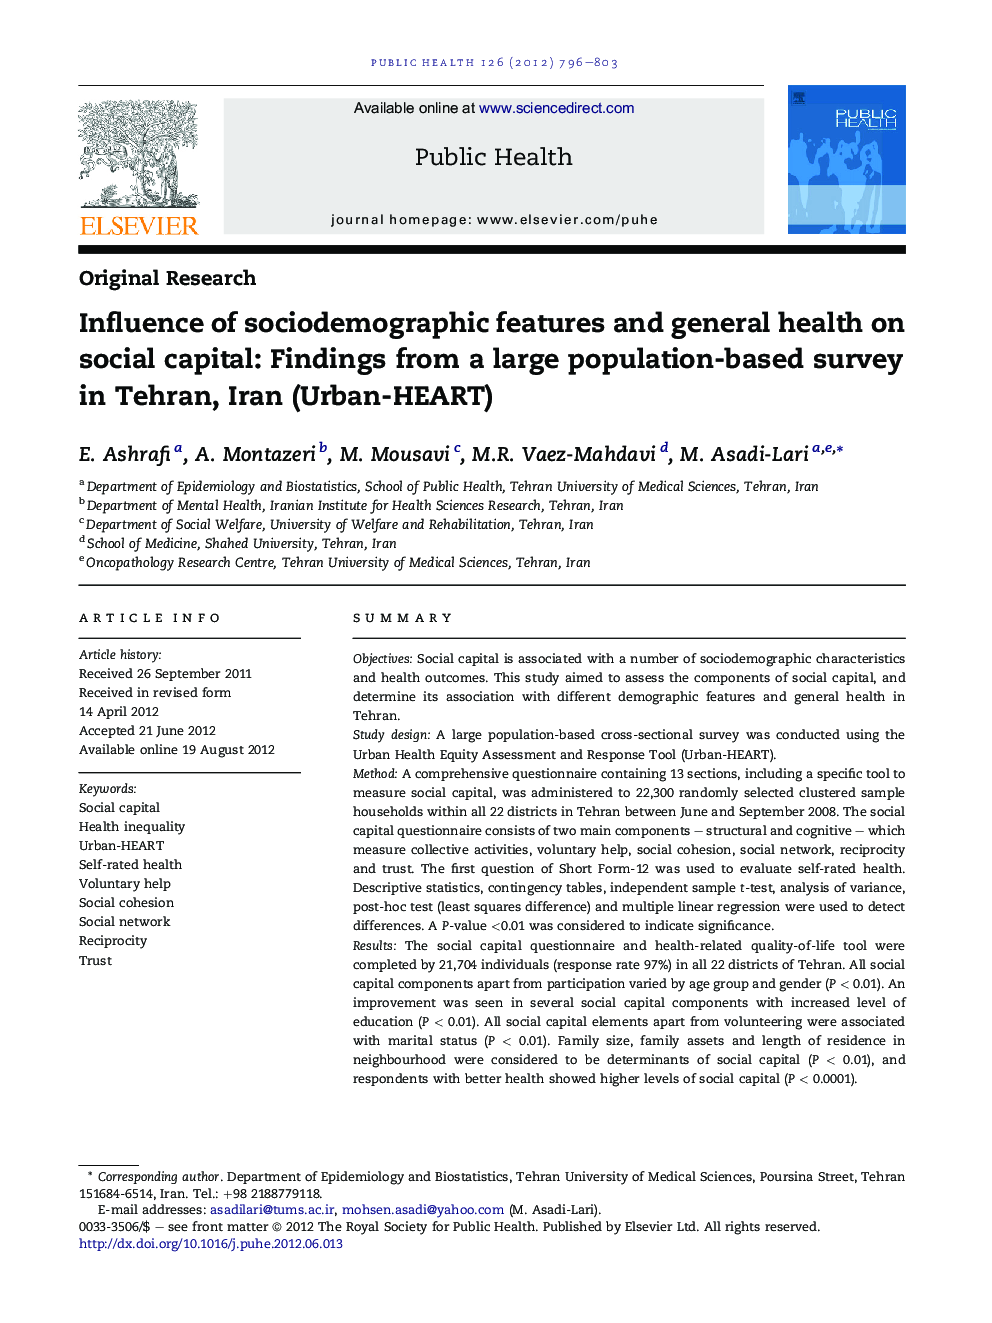 Influence of sociodemographic features and general health on social capital: Findings from a large population-based survey in Tehran, Iran (Urban-HEART)